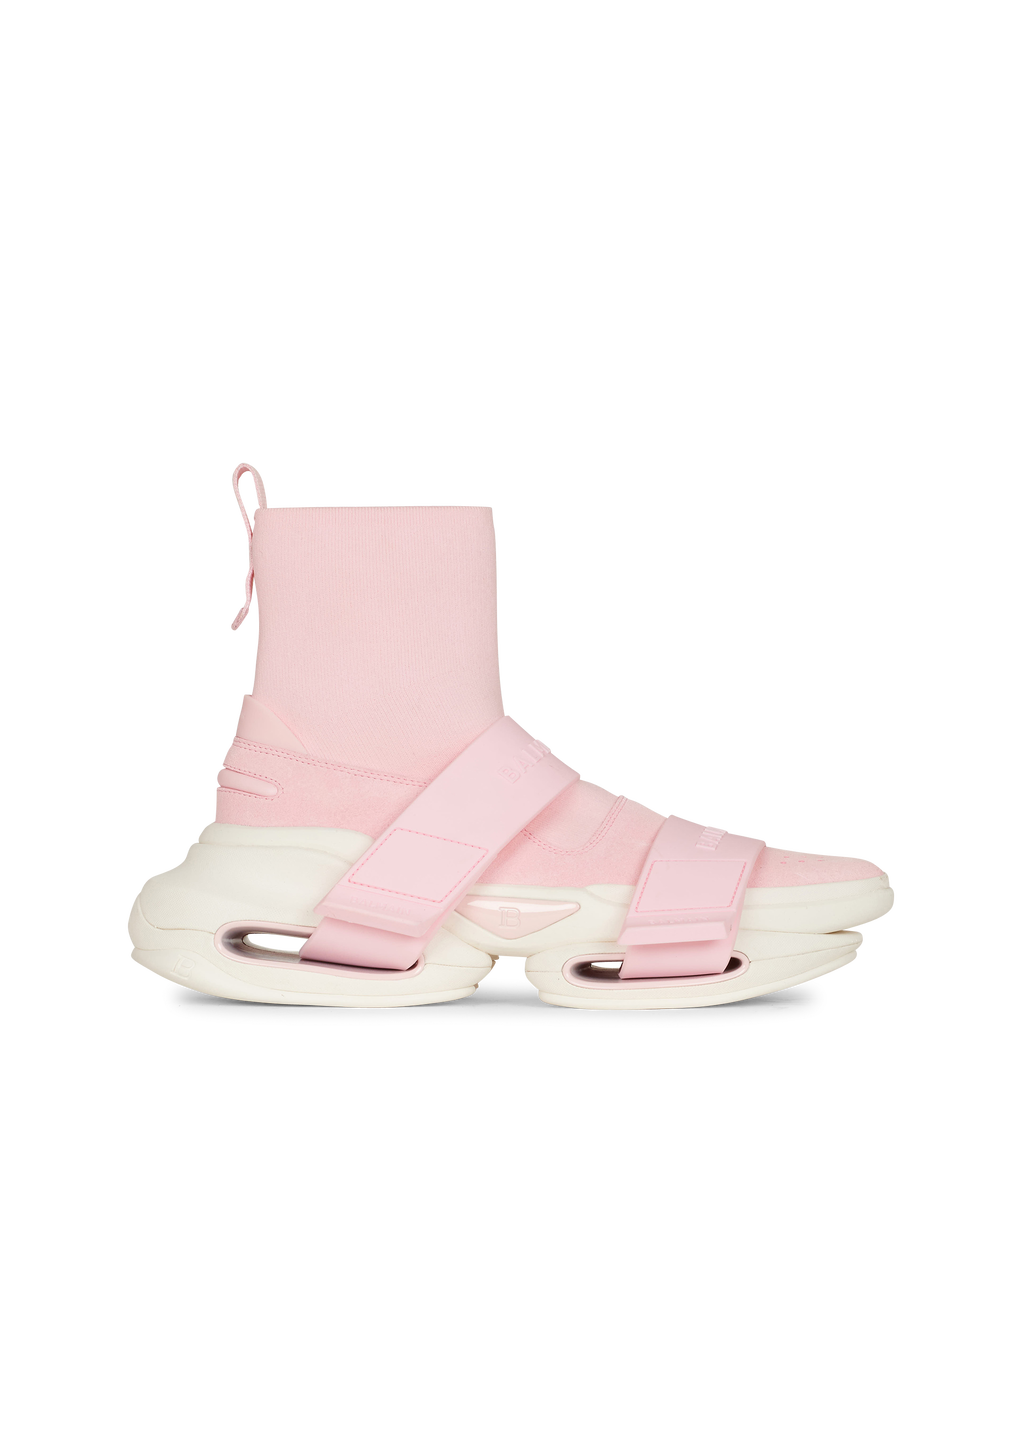 Suede and knit B-Bold sneakers with straps, pink, hi-res